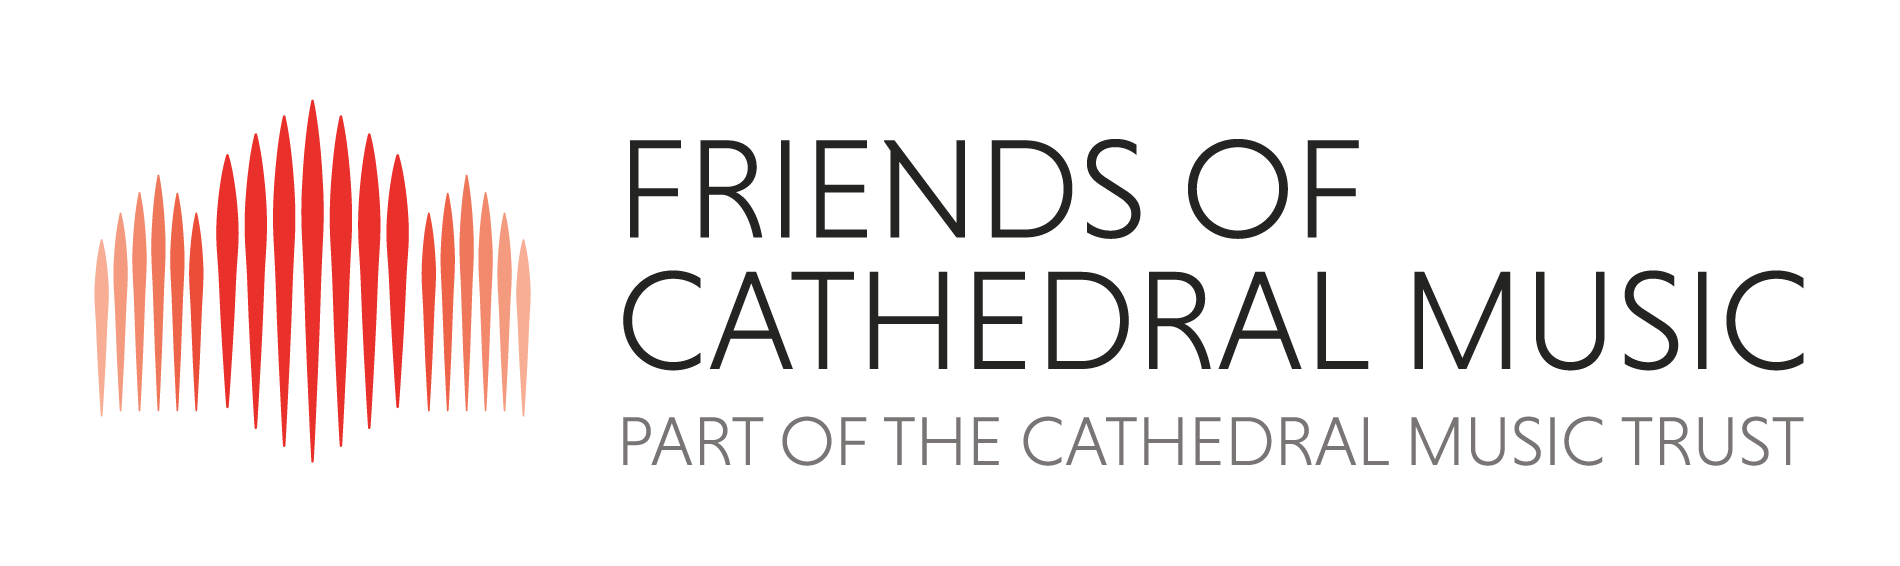 Friends of Cathedral Music logo